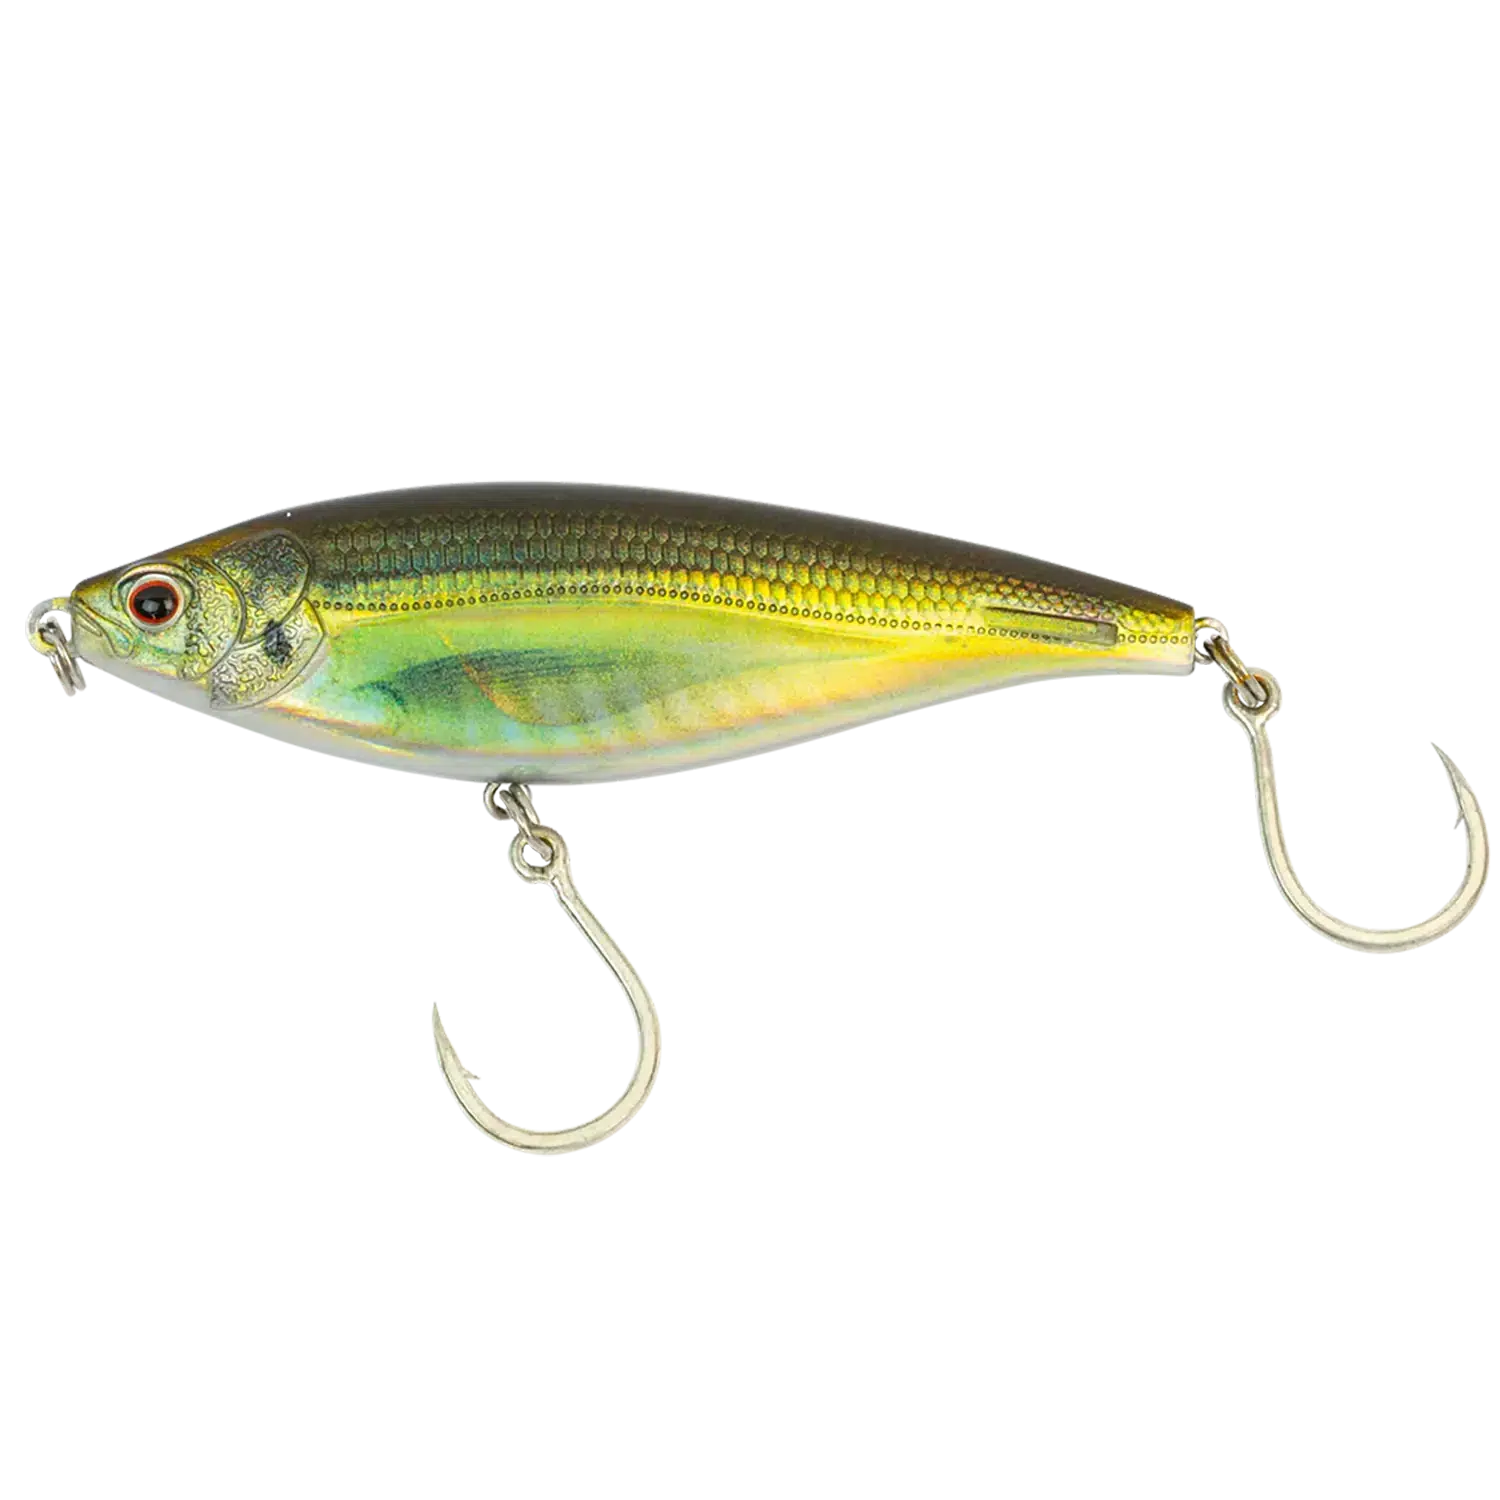 Nomad Madscad Auto Tune Slow Sink 90-Lure - Poppers, Stickbaits & Pencils-Nomad-Olive Back Shad-Fishing Station